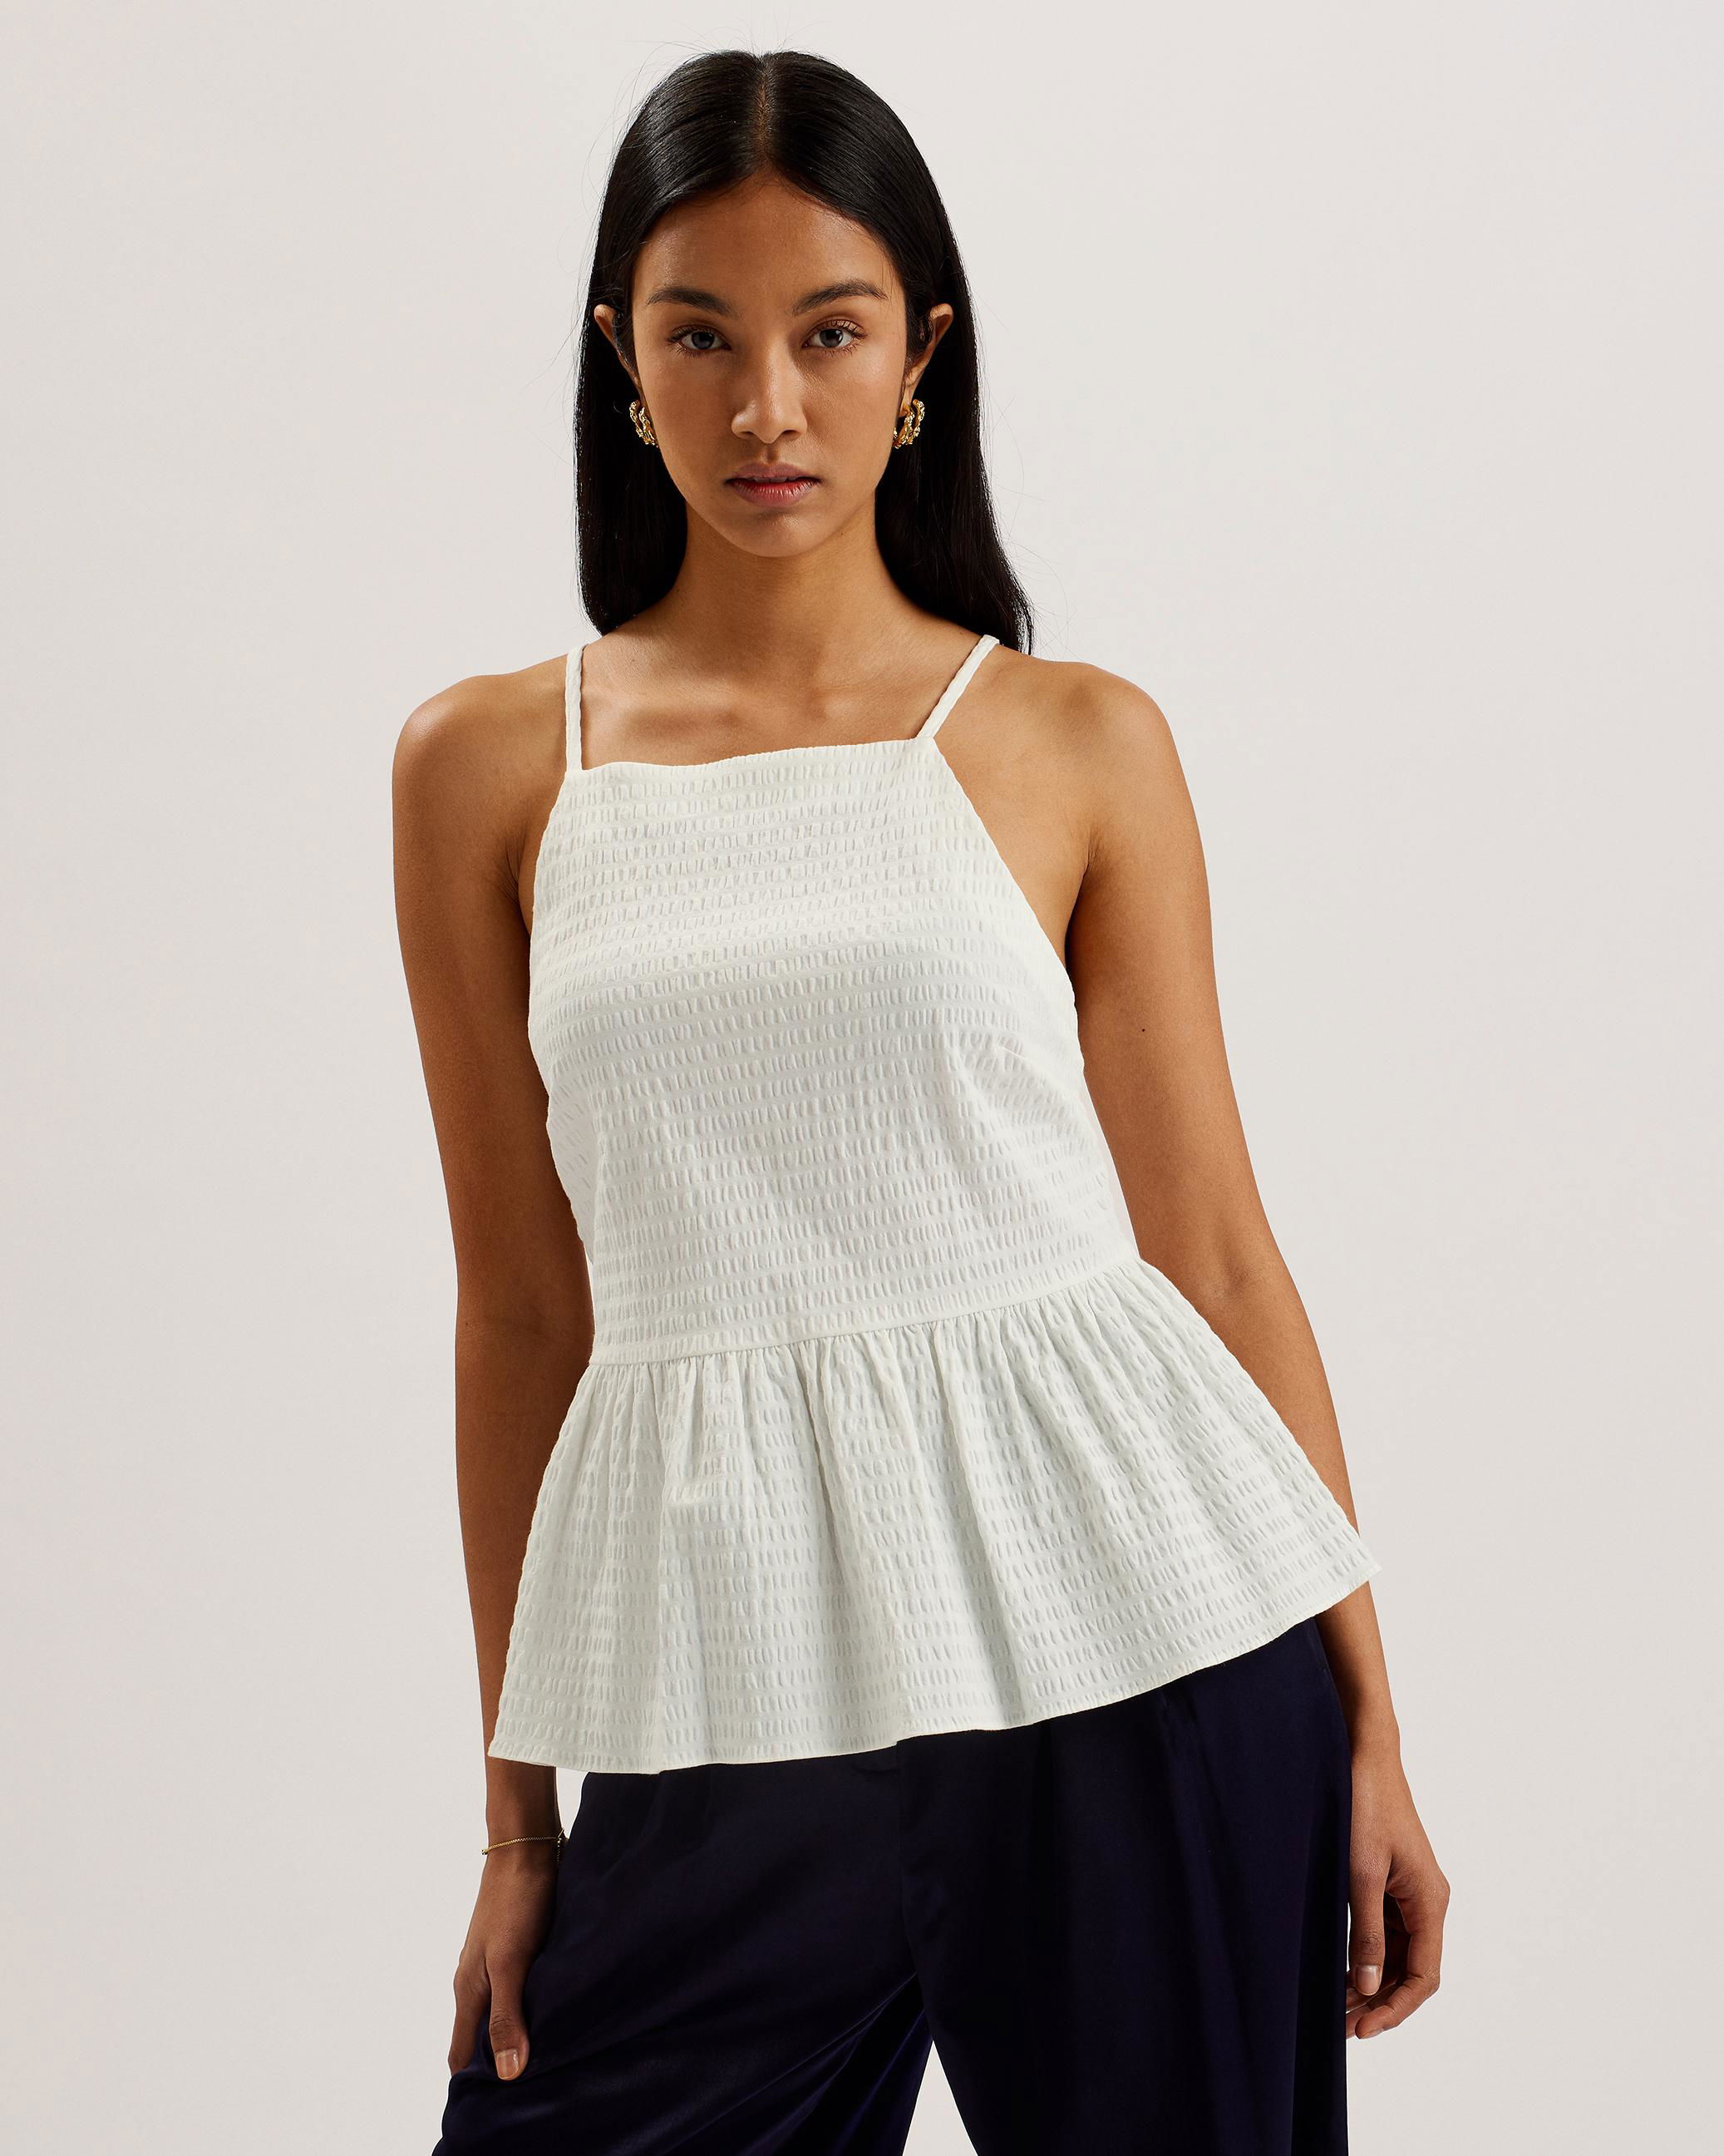 Seersucker Peplum Strappy Cami Top - INEIA - White by TED BAKER